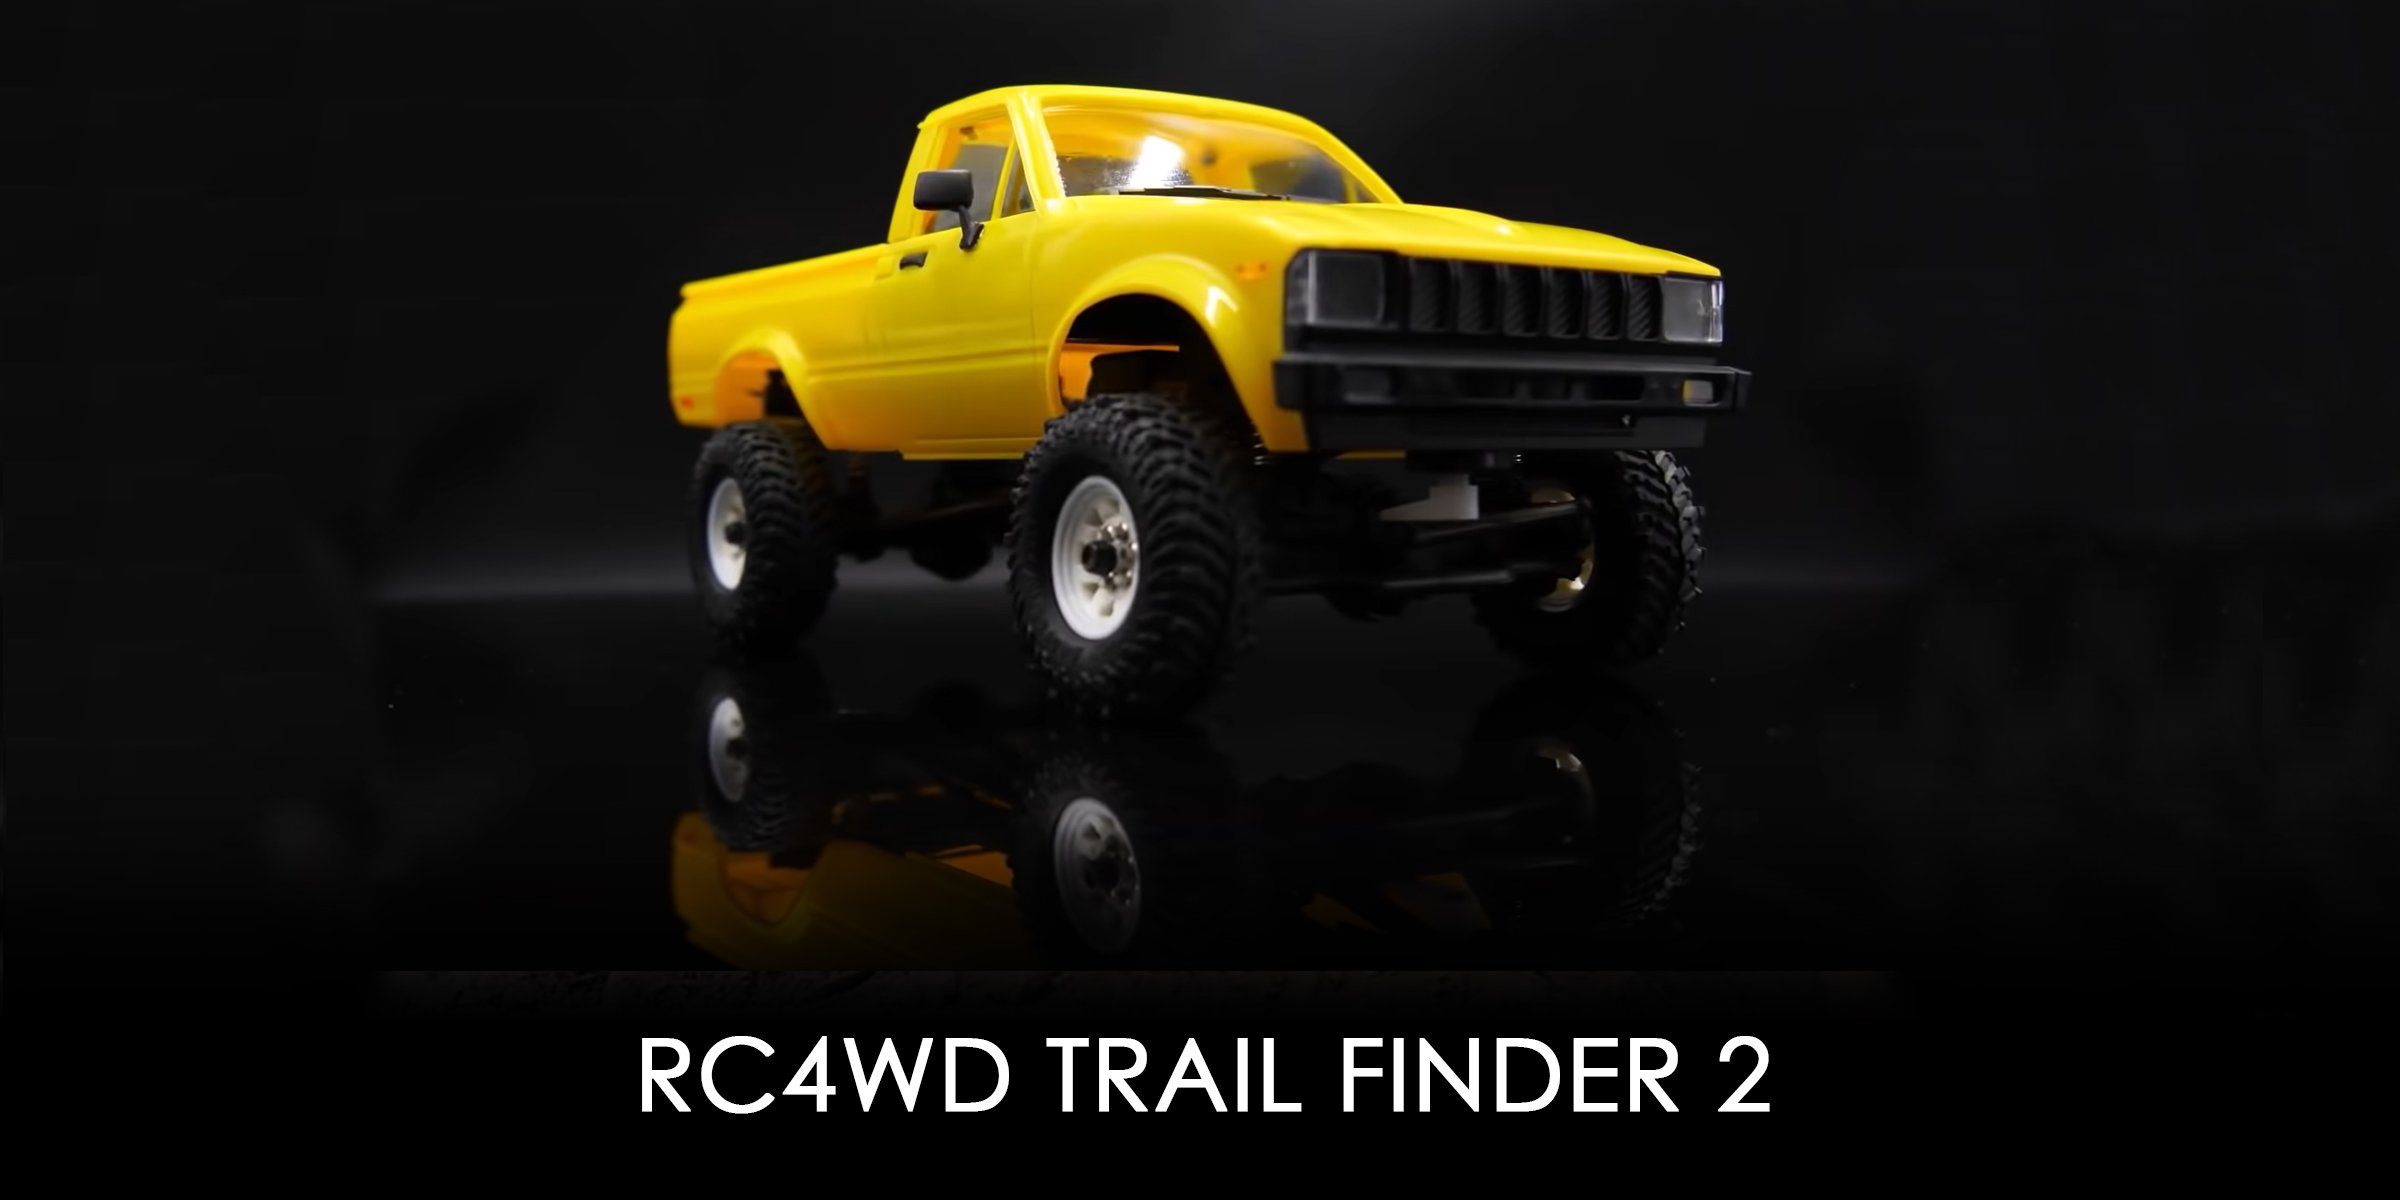 Top 10 Indoor RC Cars - #4 RC4WD Trail Finder 2 1:24 Scale Vehicles